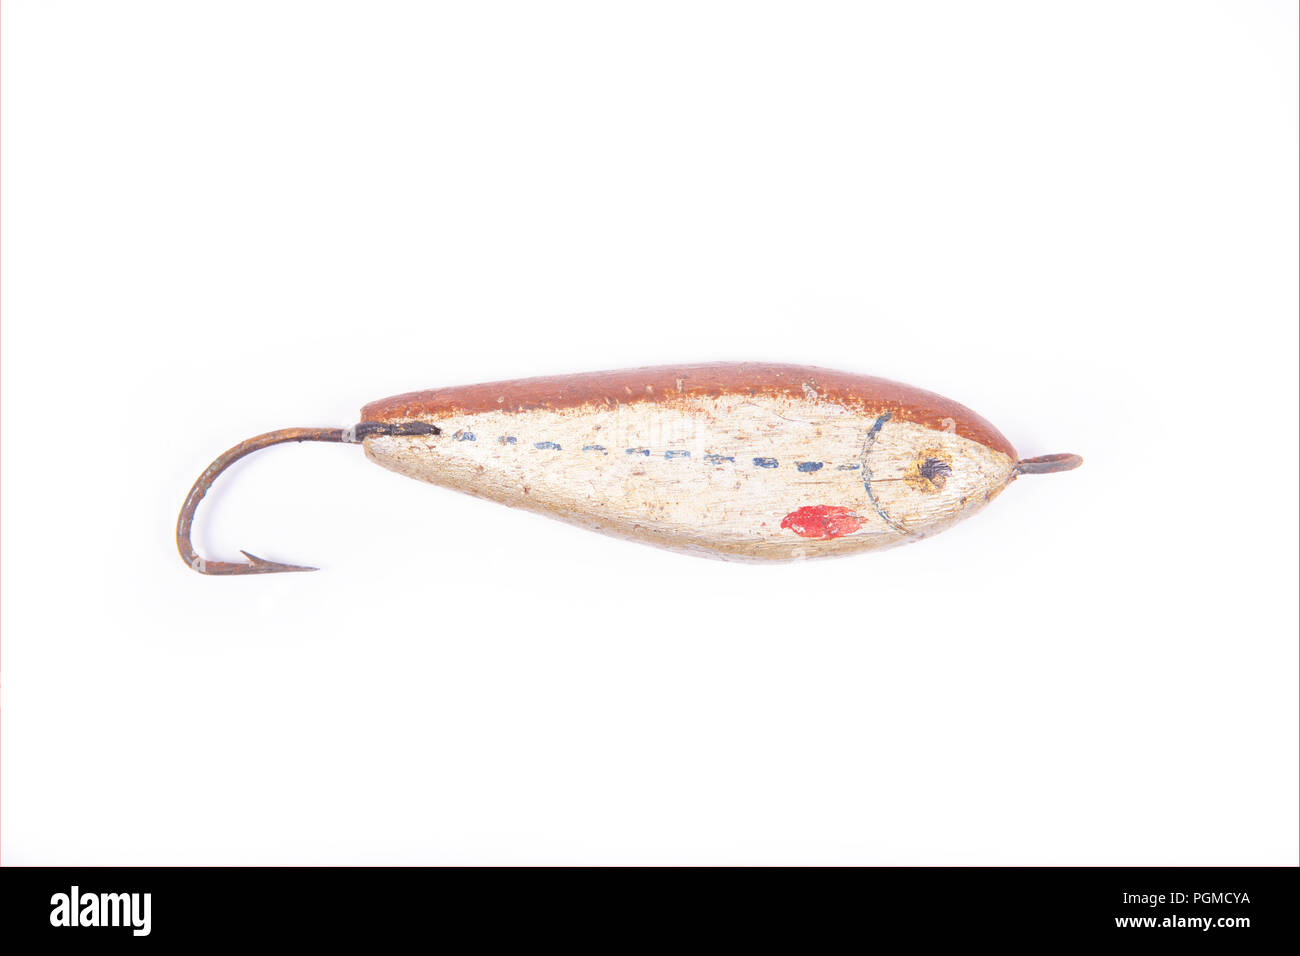 https://c8.alamy.com/comp/PGMCYA/a-homemade-wooden-fiishing-lure-designed-for-catching-predatory-fish-from-a-collection-of-vintage-and-modern-fishing-tackle-north-dorset-england-uk-PGMCYA.jpg